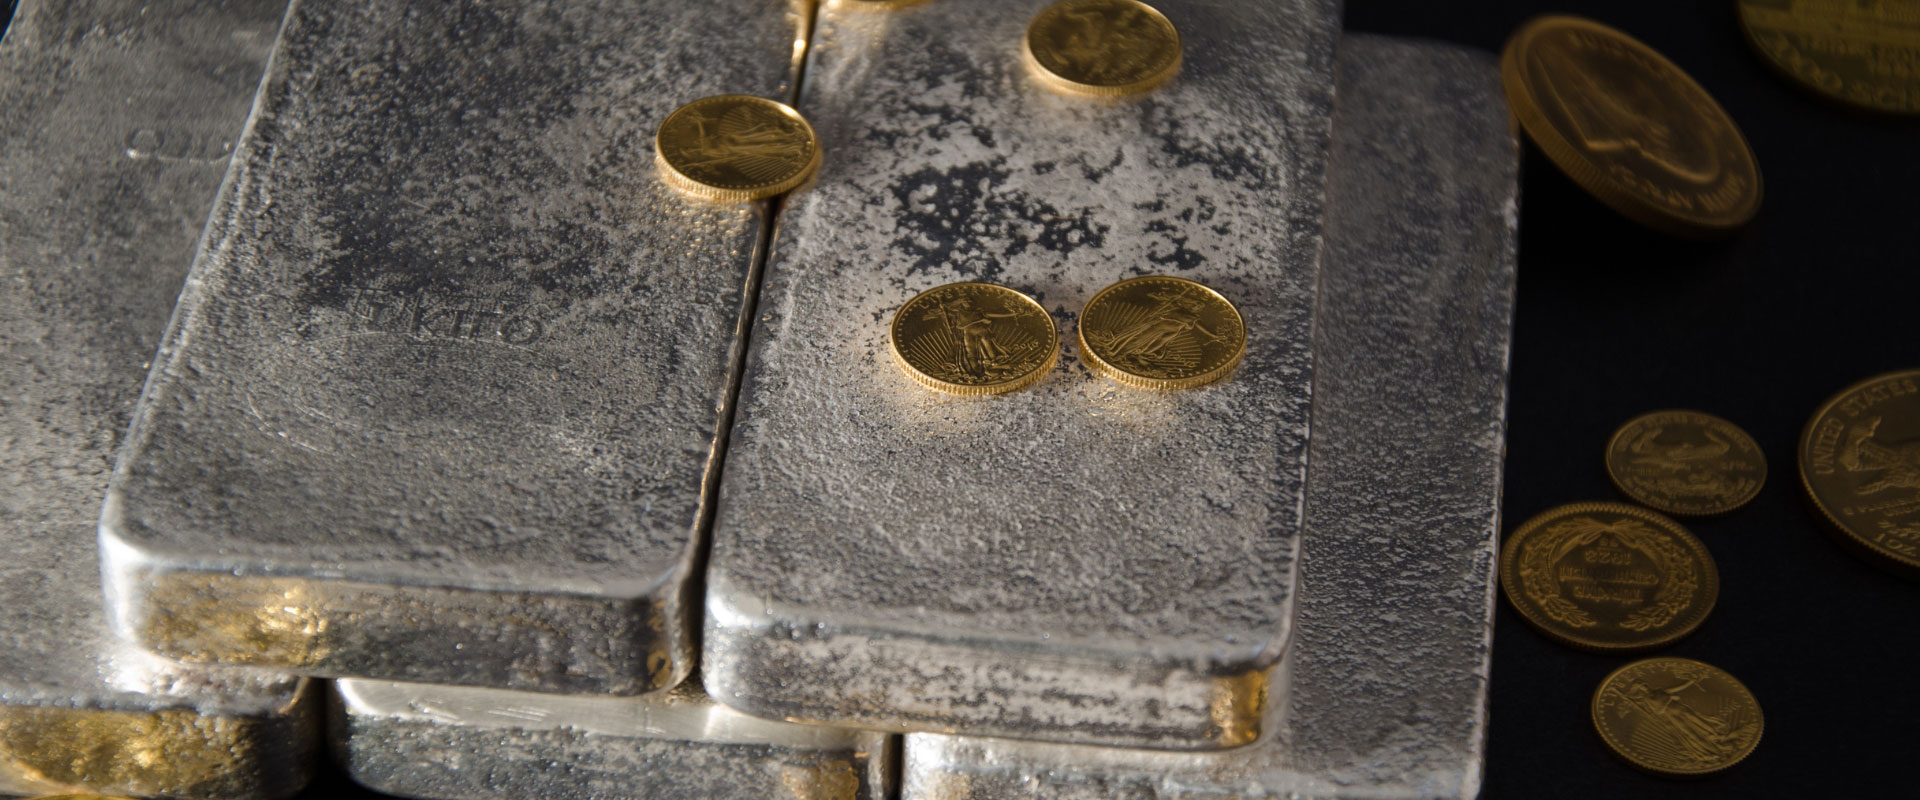 stack of silver bars with various gold coins